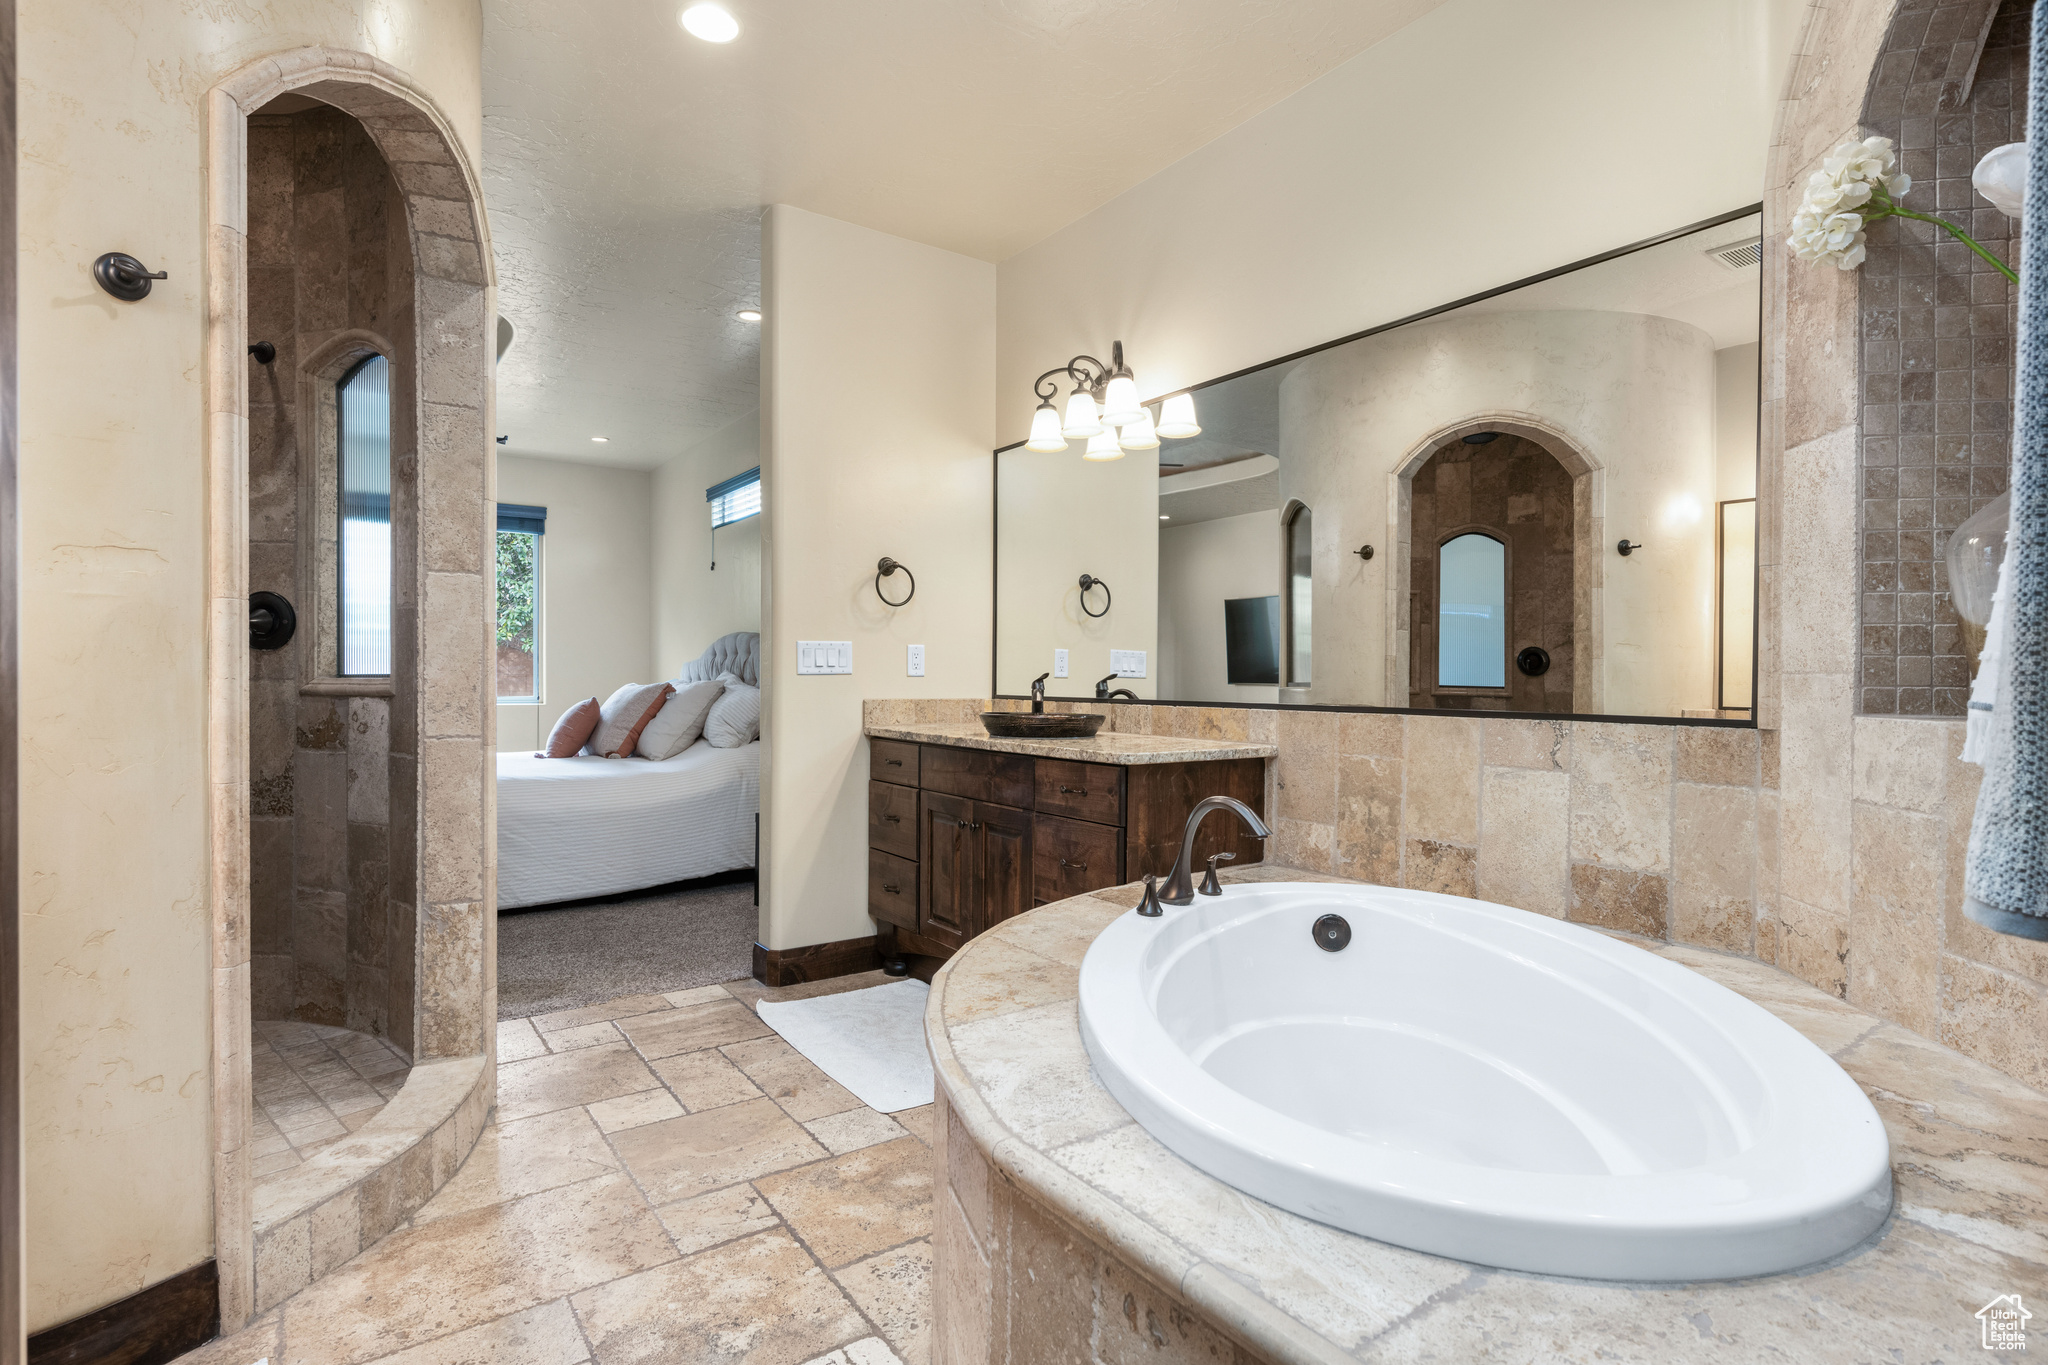 Bathroom with vanity with extensive cabinet space, separate shower and tub, tile floors, and tile walls